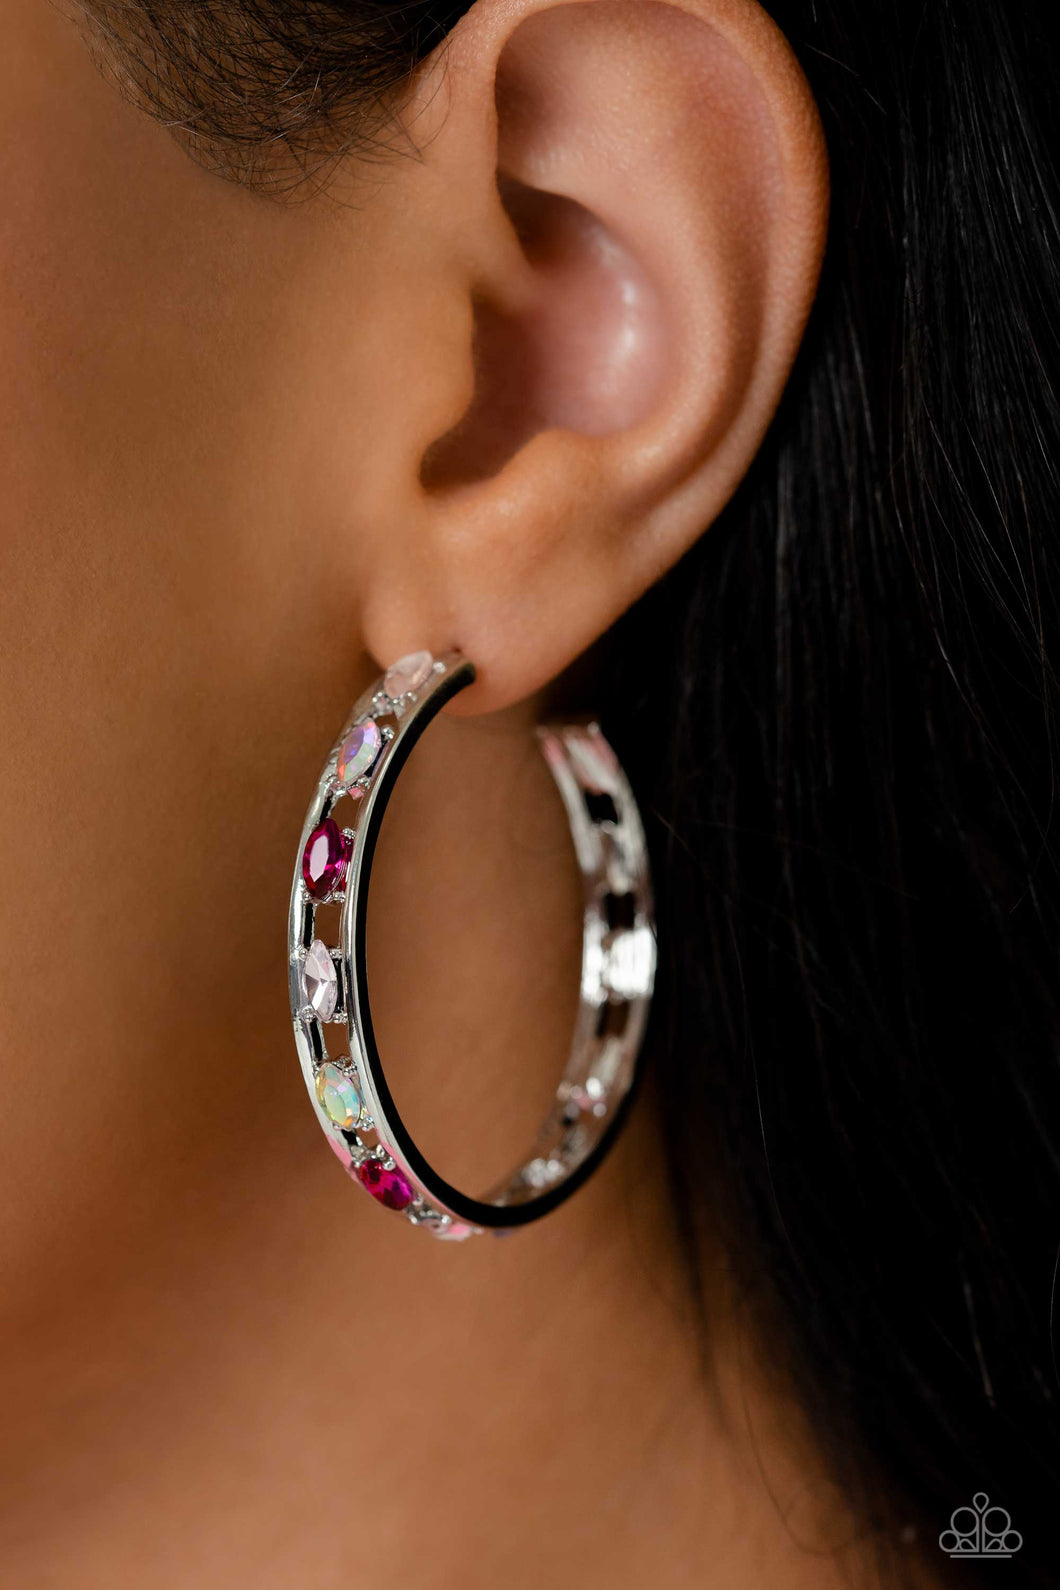 Paparazzi “Life of the Party” The Gem Fairy” Pink Hoop Earrings - CindysBlingBoutique